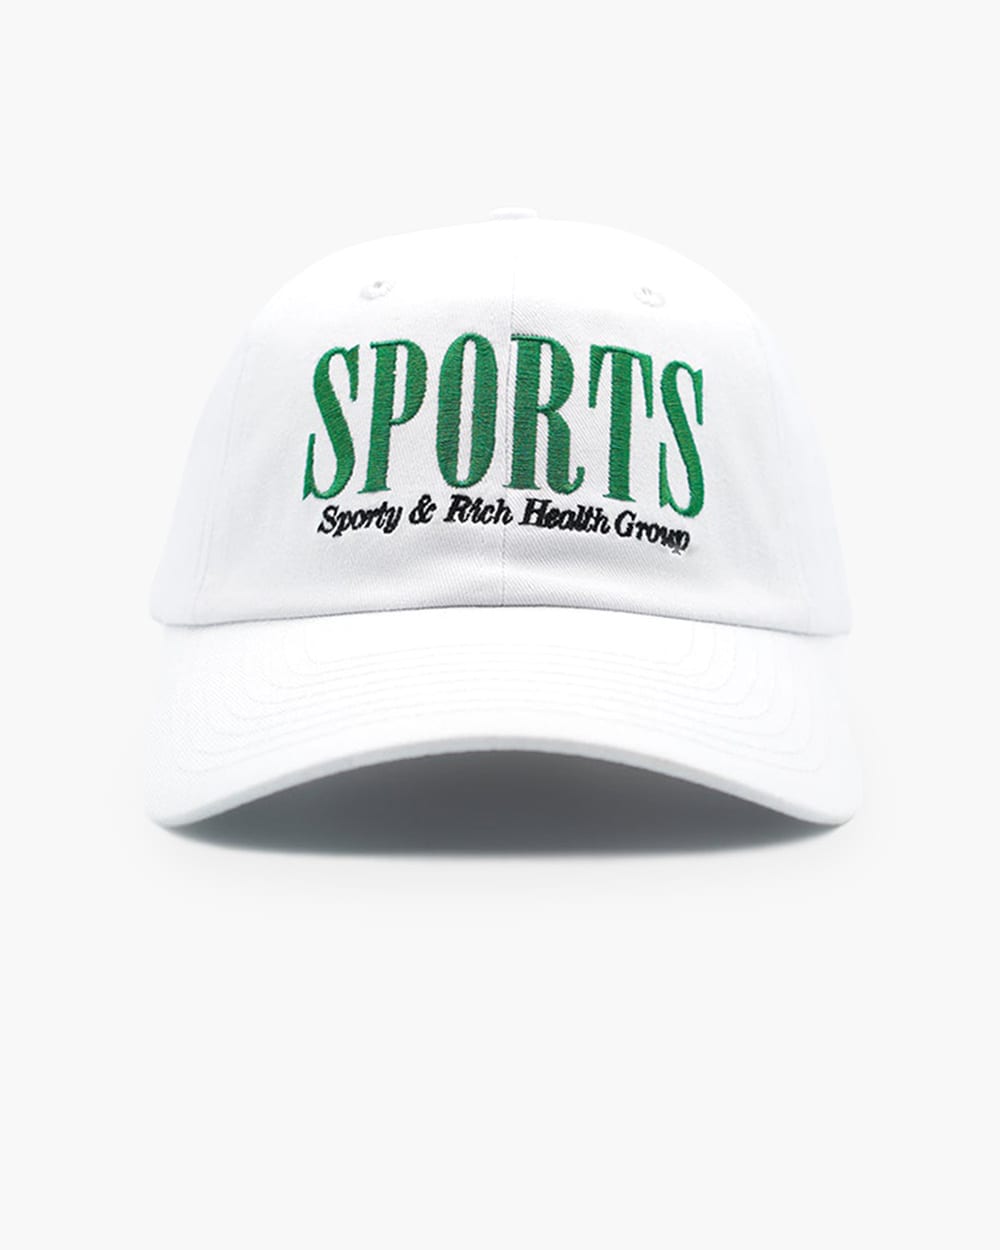 SPORTY AND RICH Hats | ModeSens